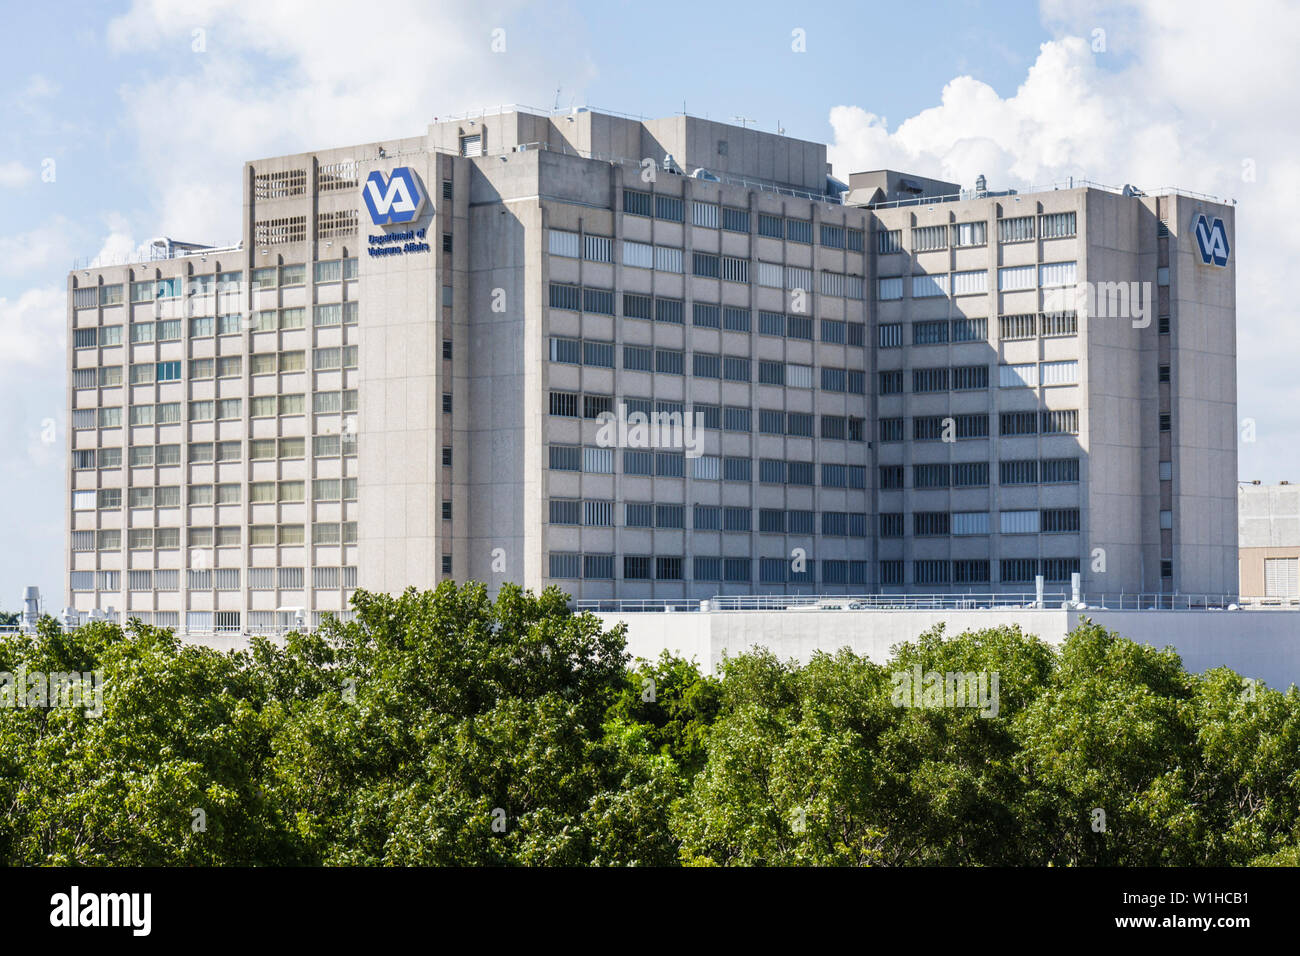 Miami Florida,VA,Department of Veterans Affairs Hospital,healthcare,government run,medical facility,military benefit,charity,building,health care,FL09 Stock Photo